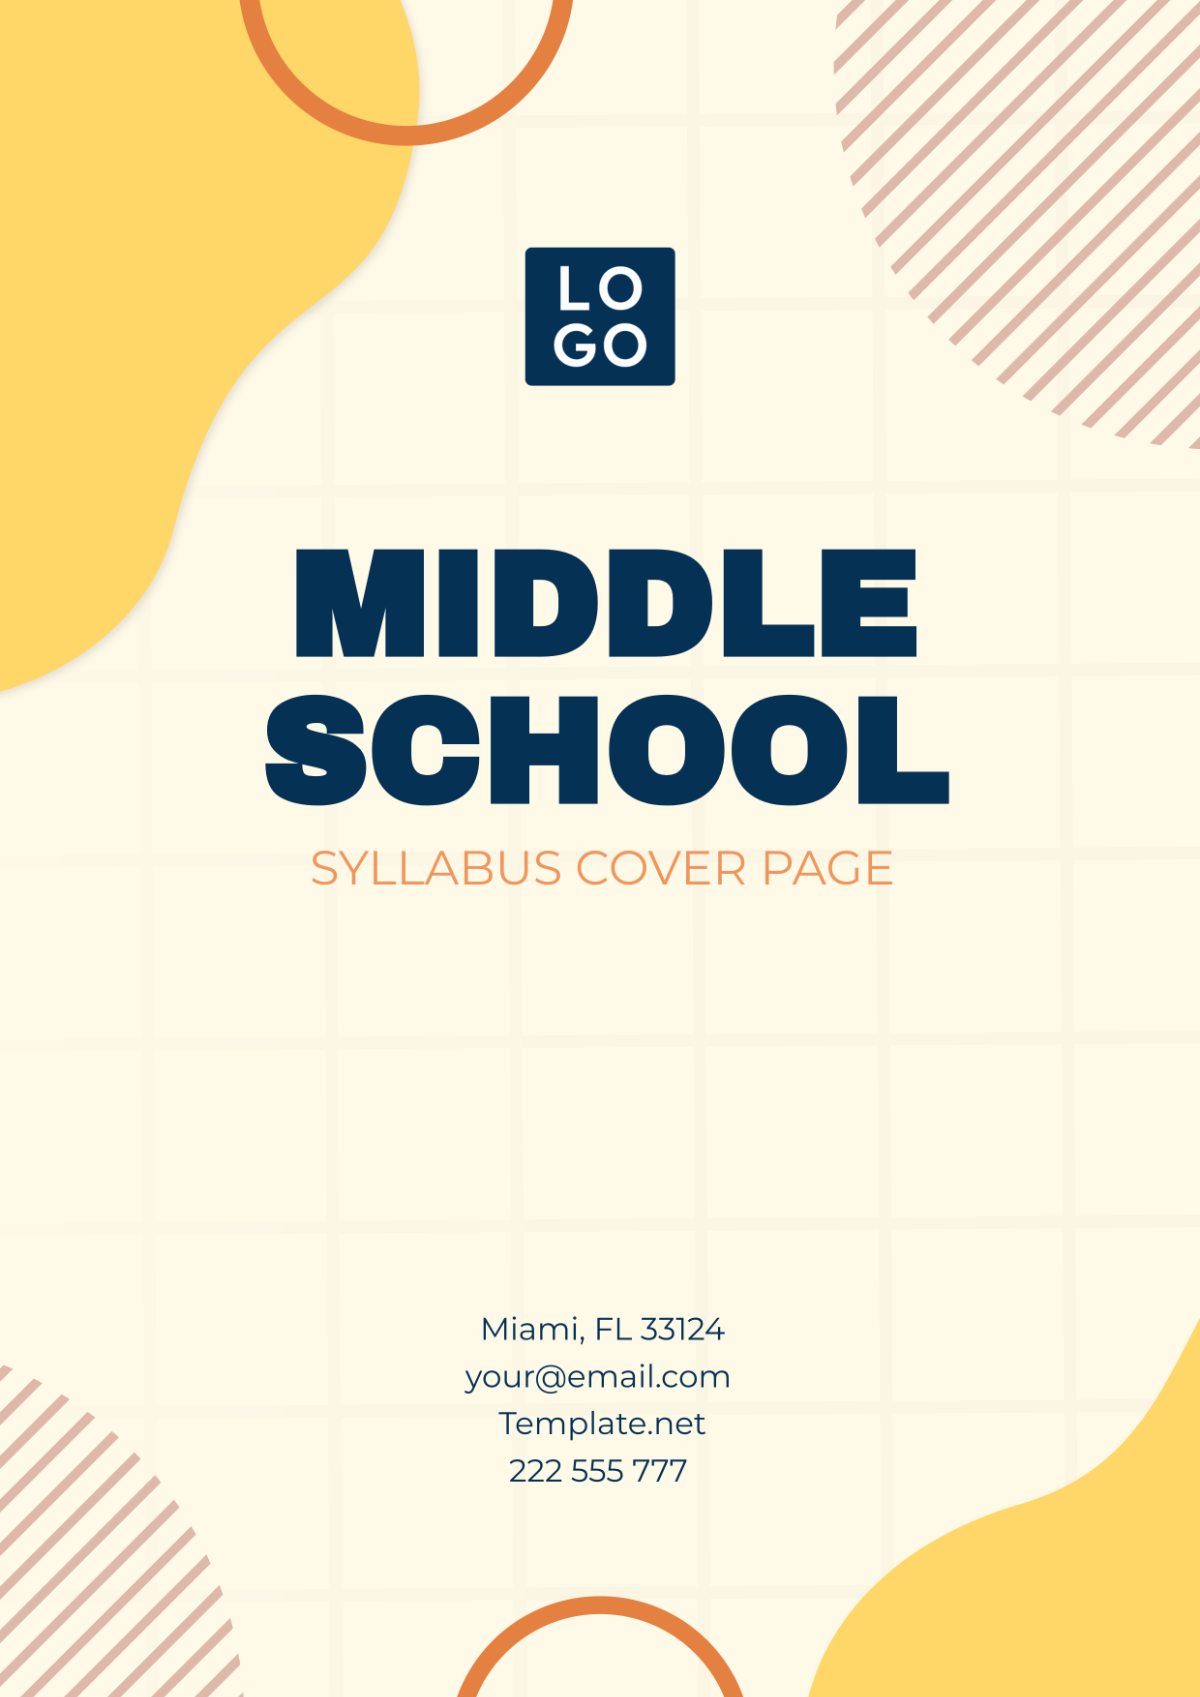 Middle School Syllabus Cover Page Template